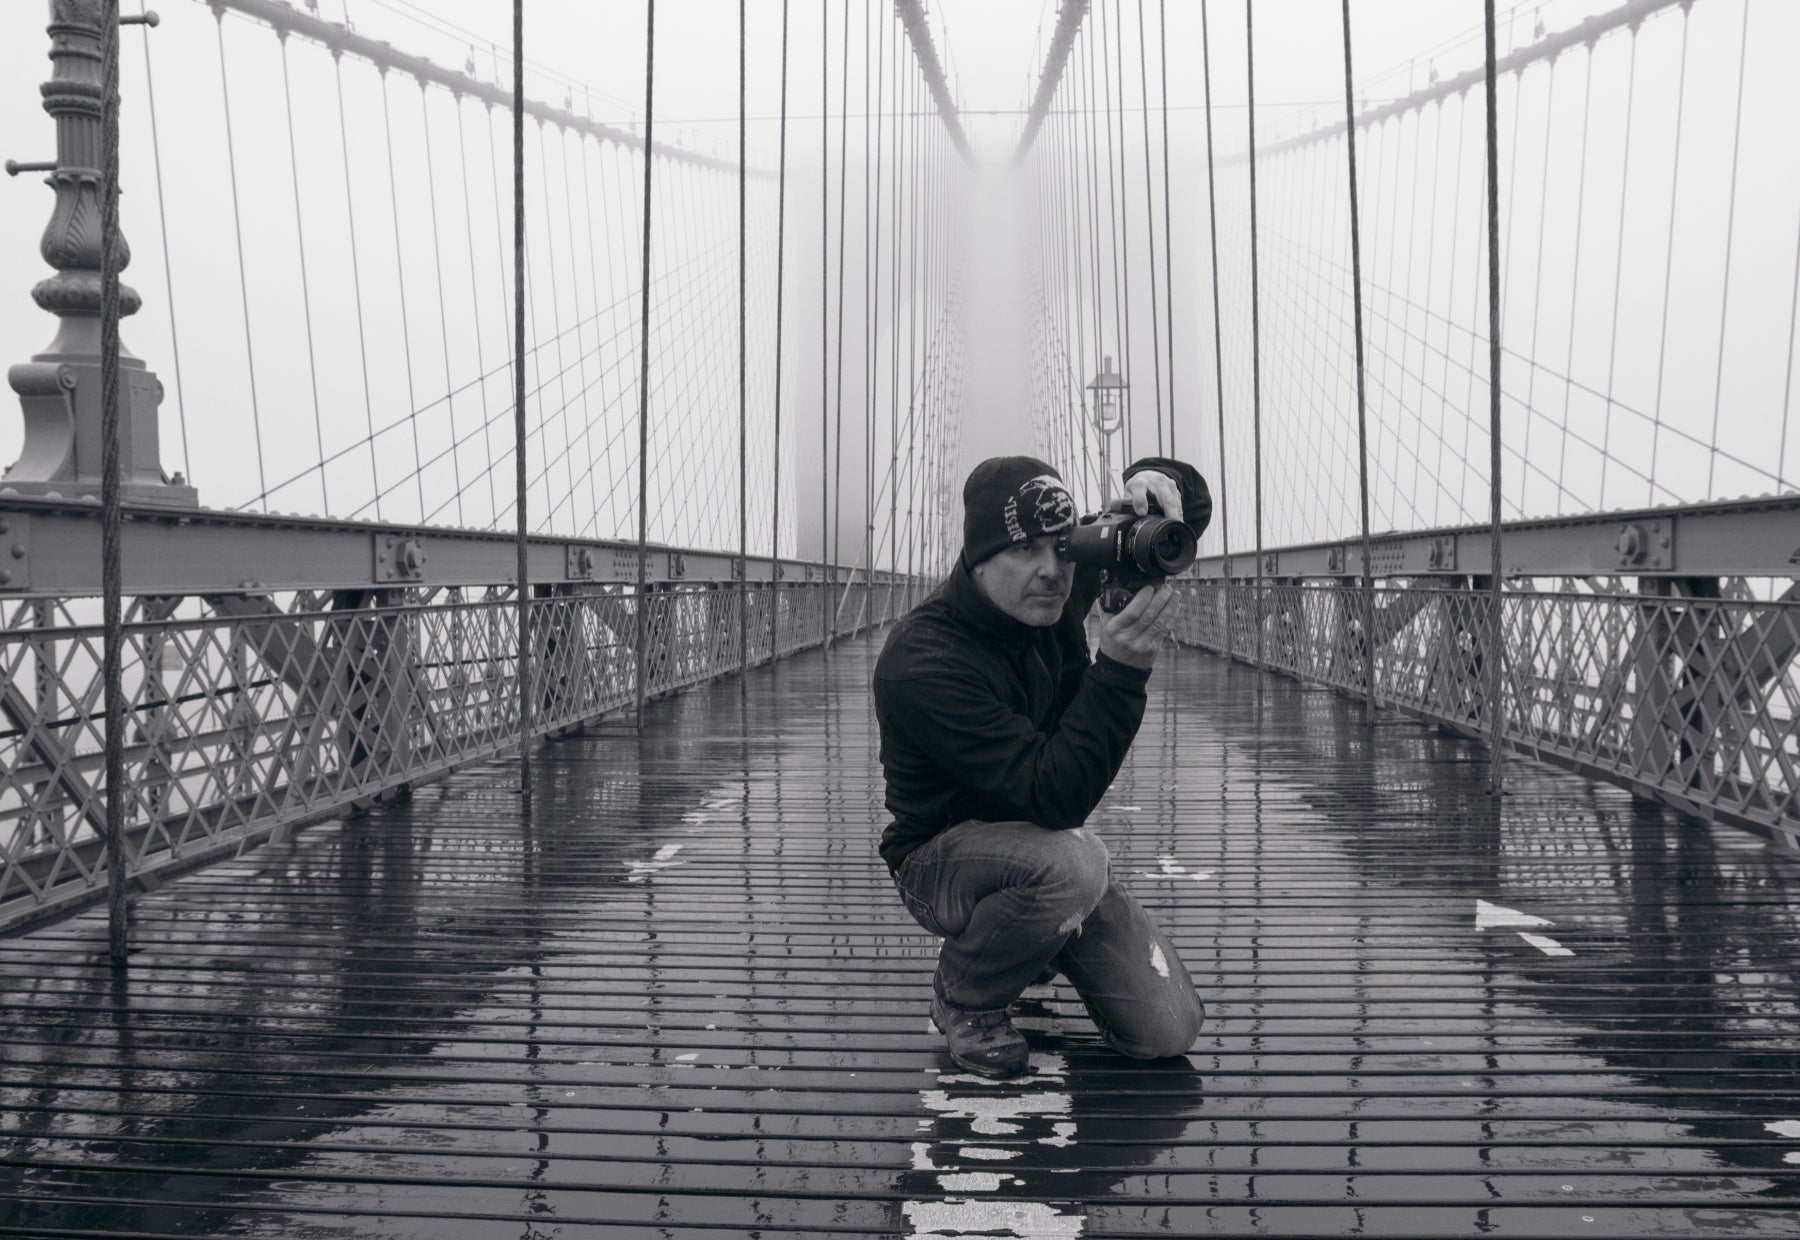 Black and white portrait of Peter Lik kneeling on the Manhattan Bridge during the rain taking a photograph with the steel support cables suspended in the background